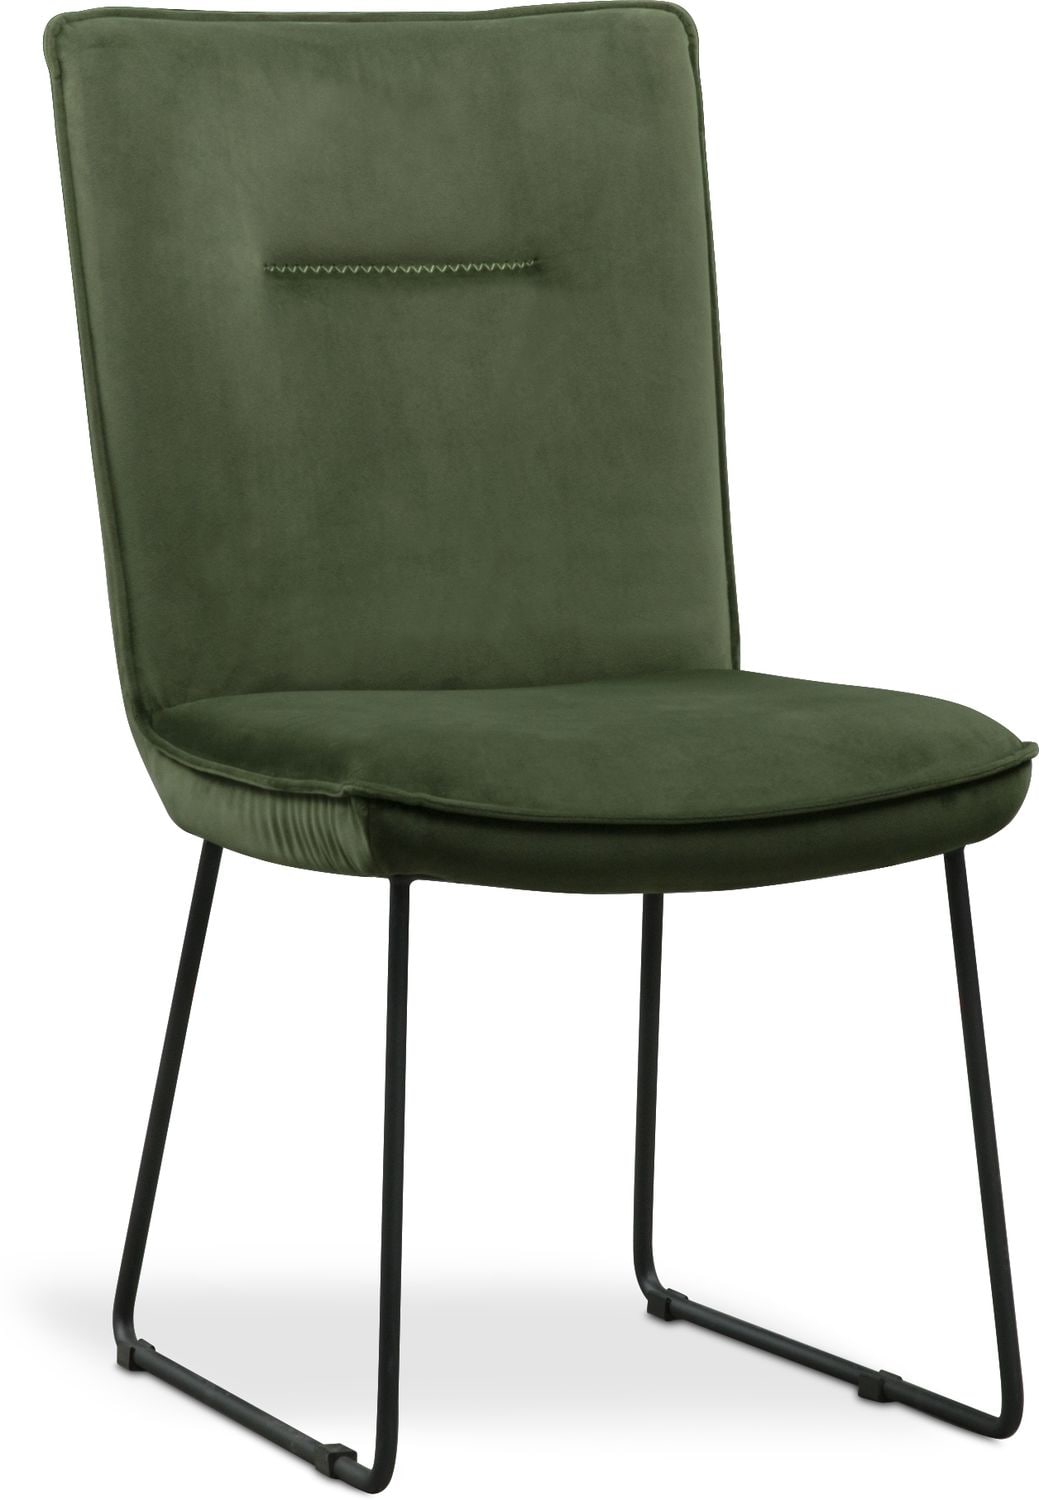 Value City Dining Room Chairs - Click to change image. - Dining chairs